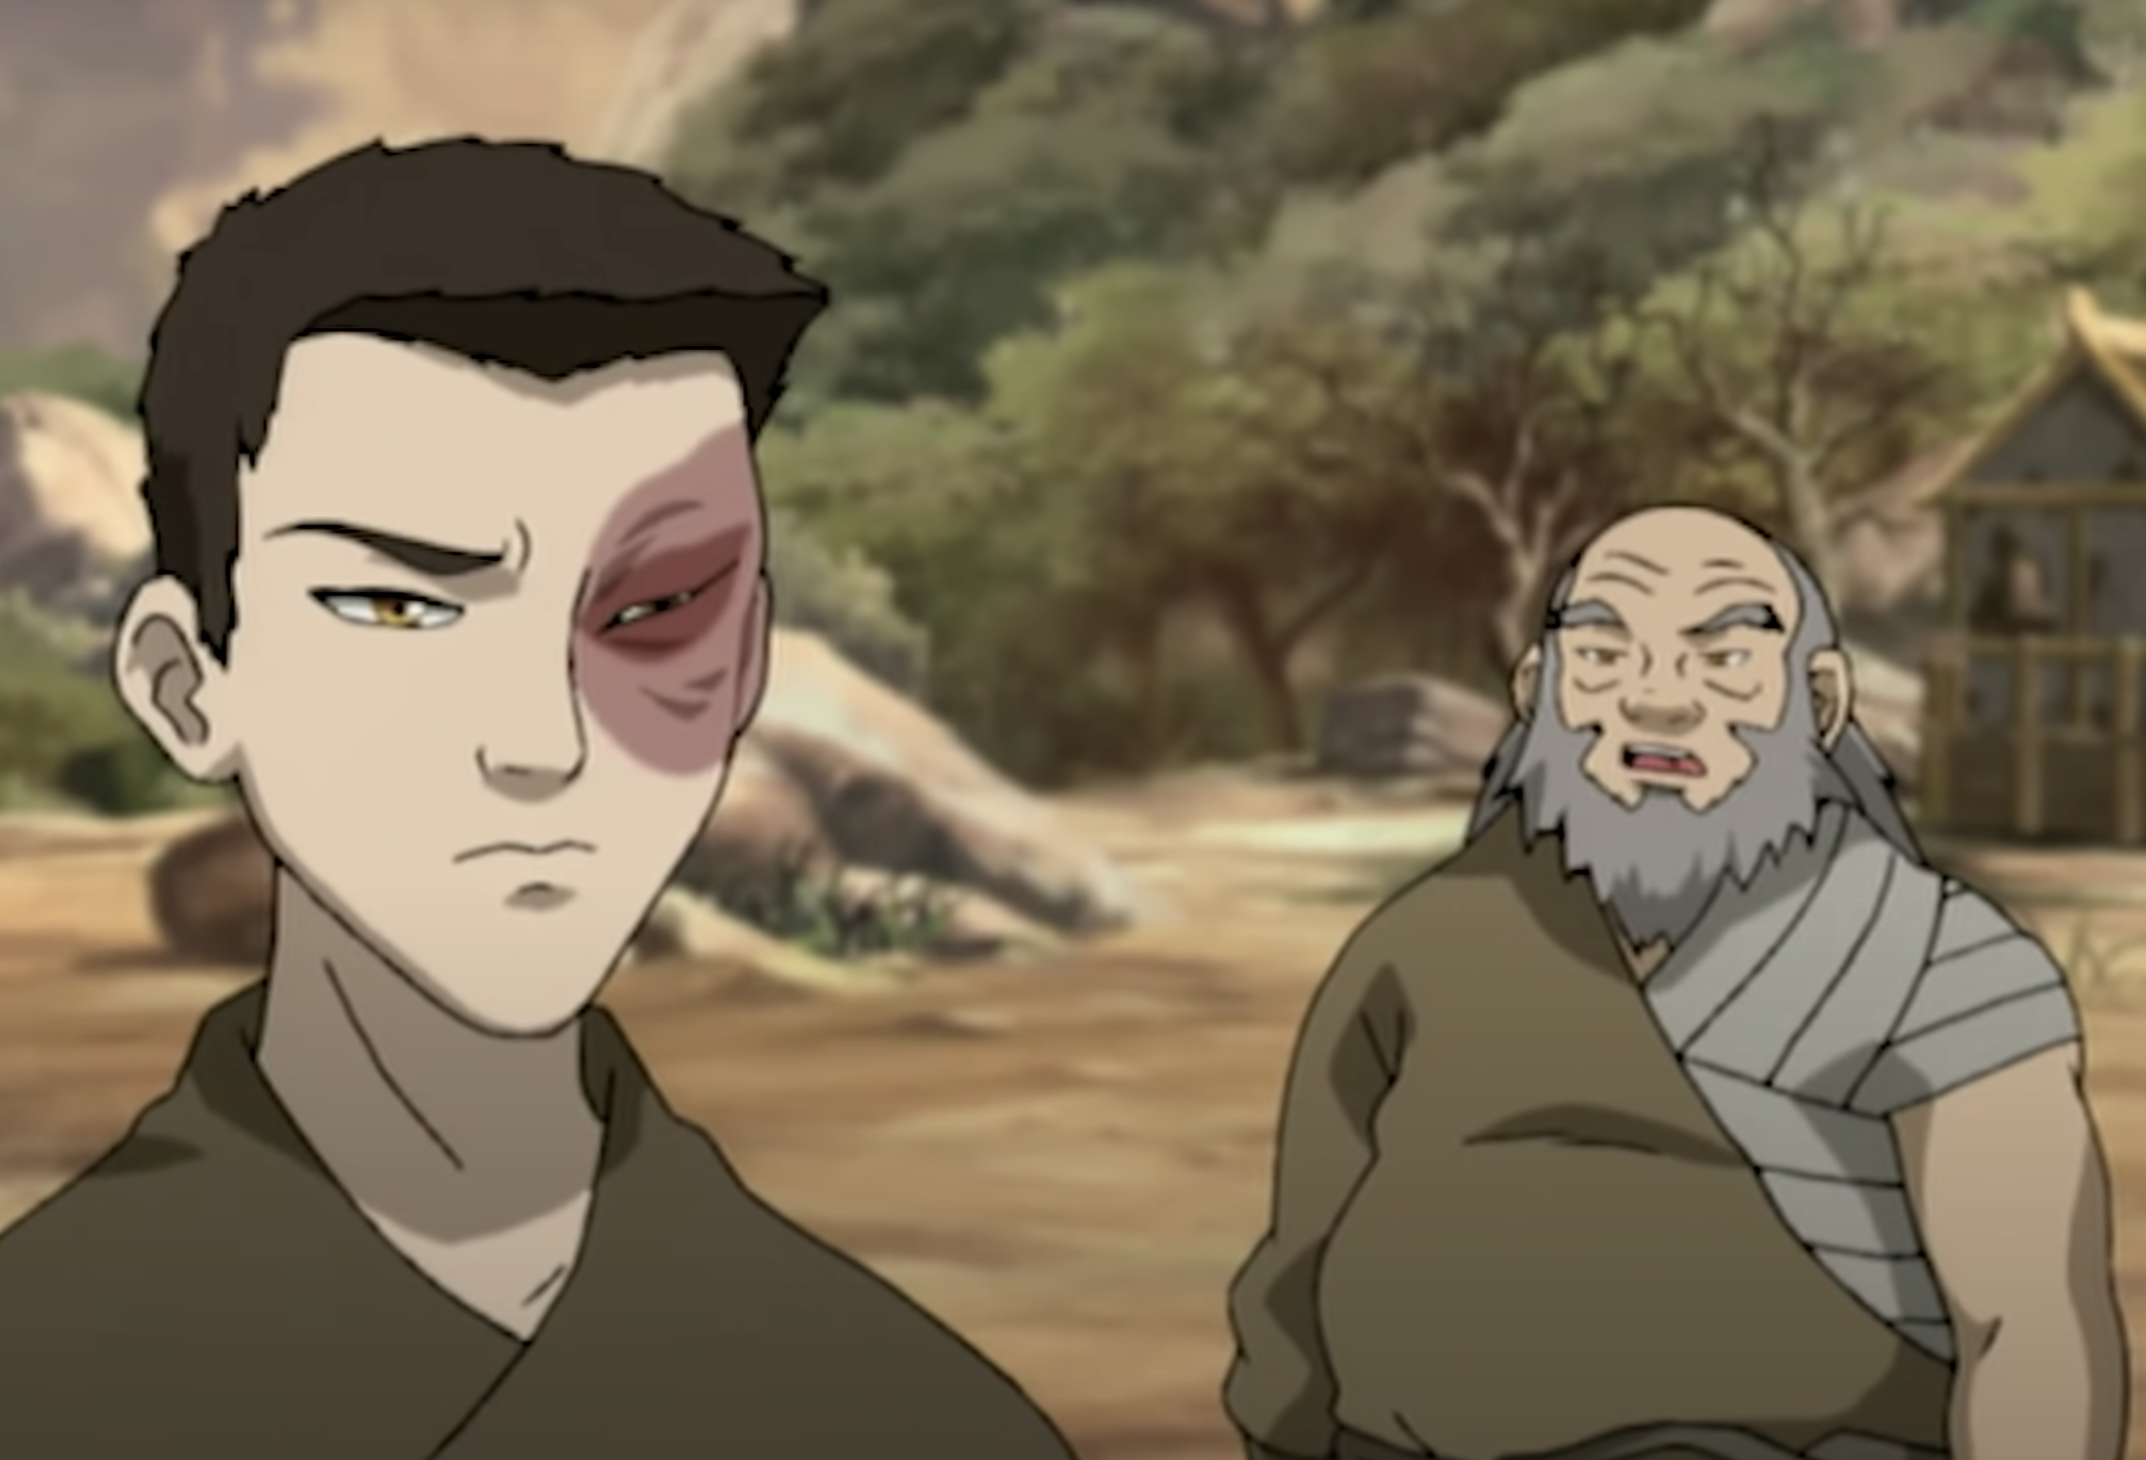 Uncle Iroh and Zuko training together